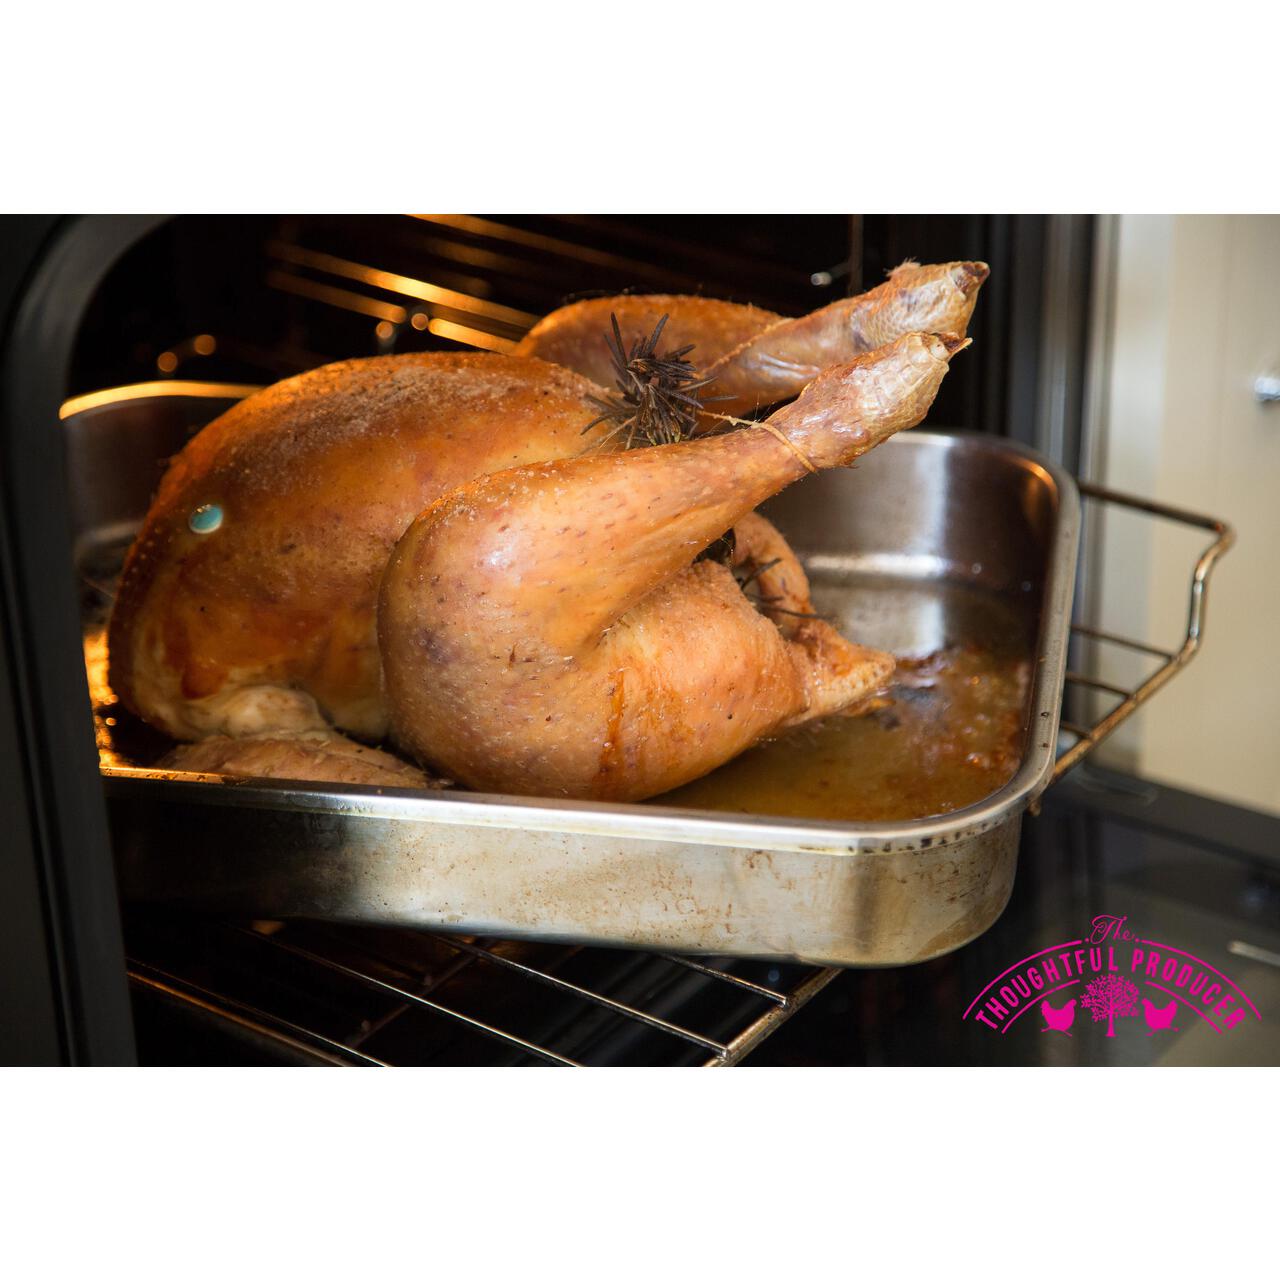 Thoughtful Producer Free Range Whole Chicken Typically: 2300g